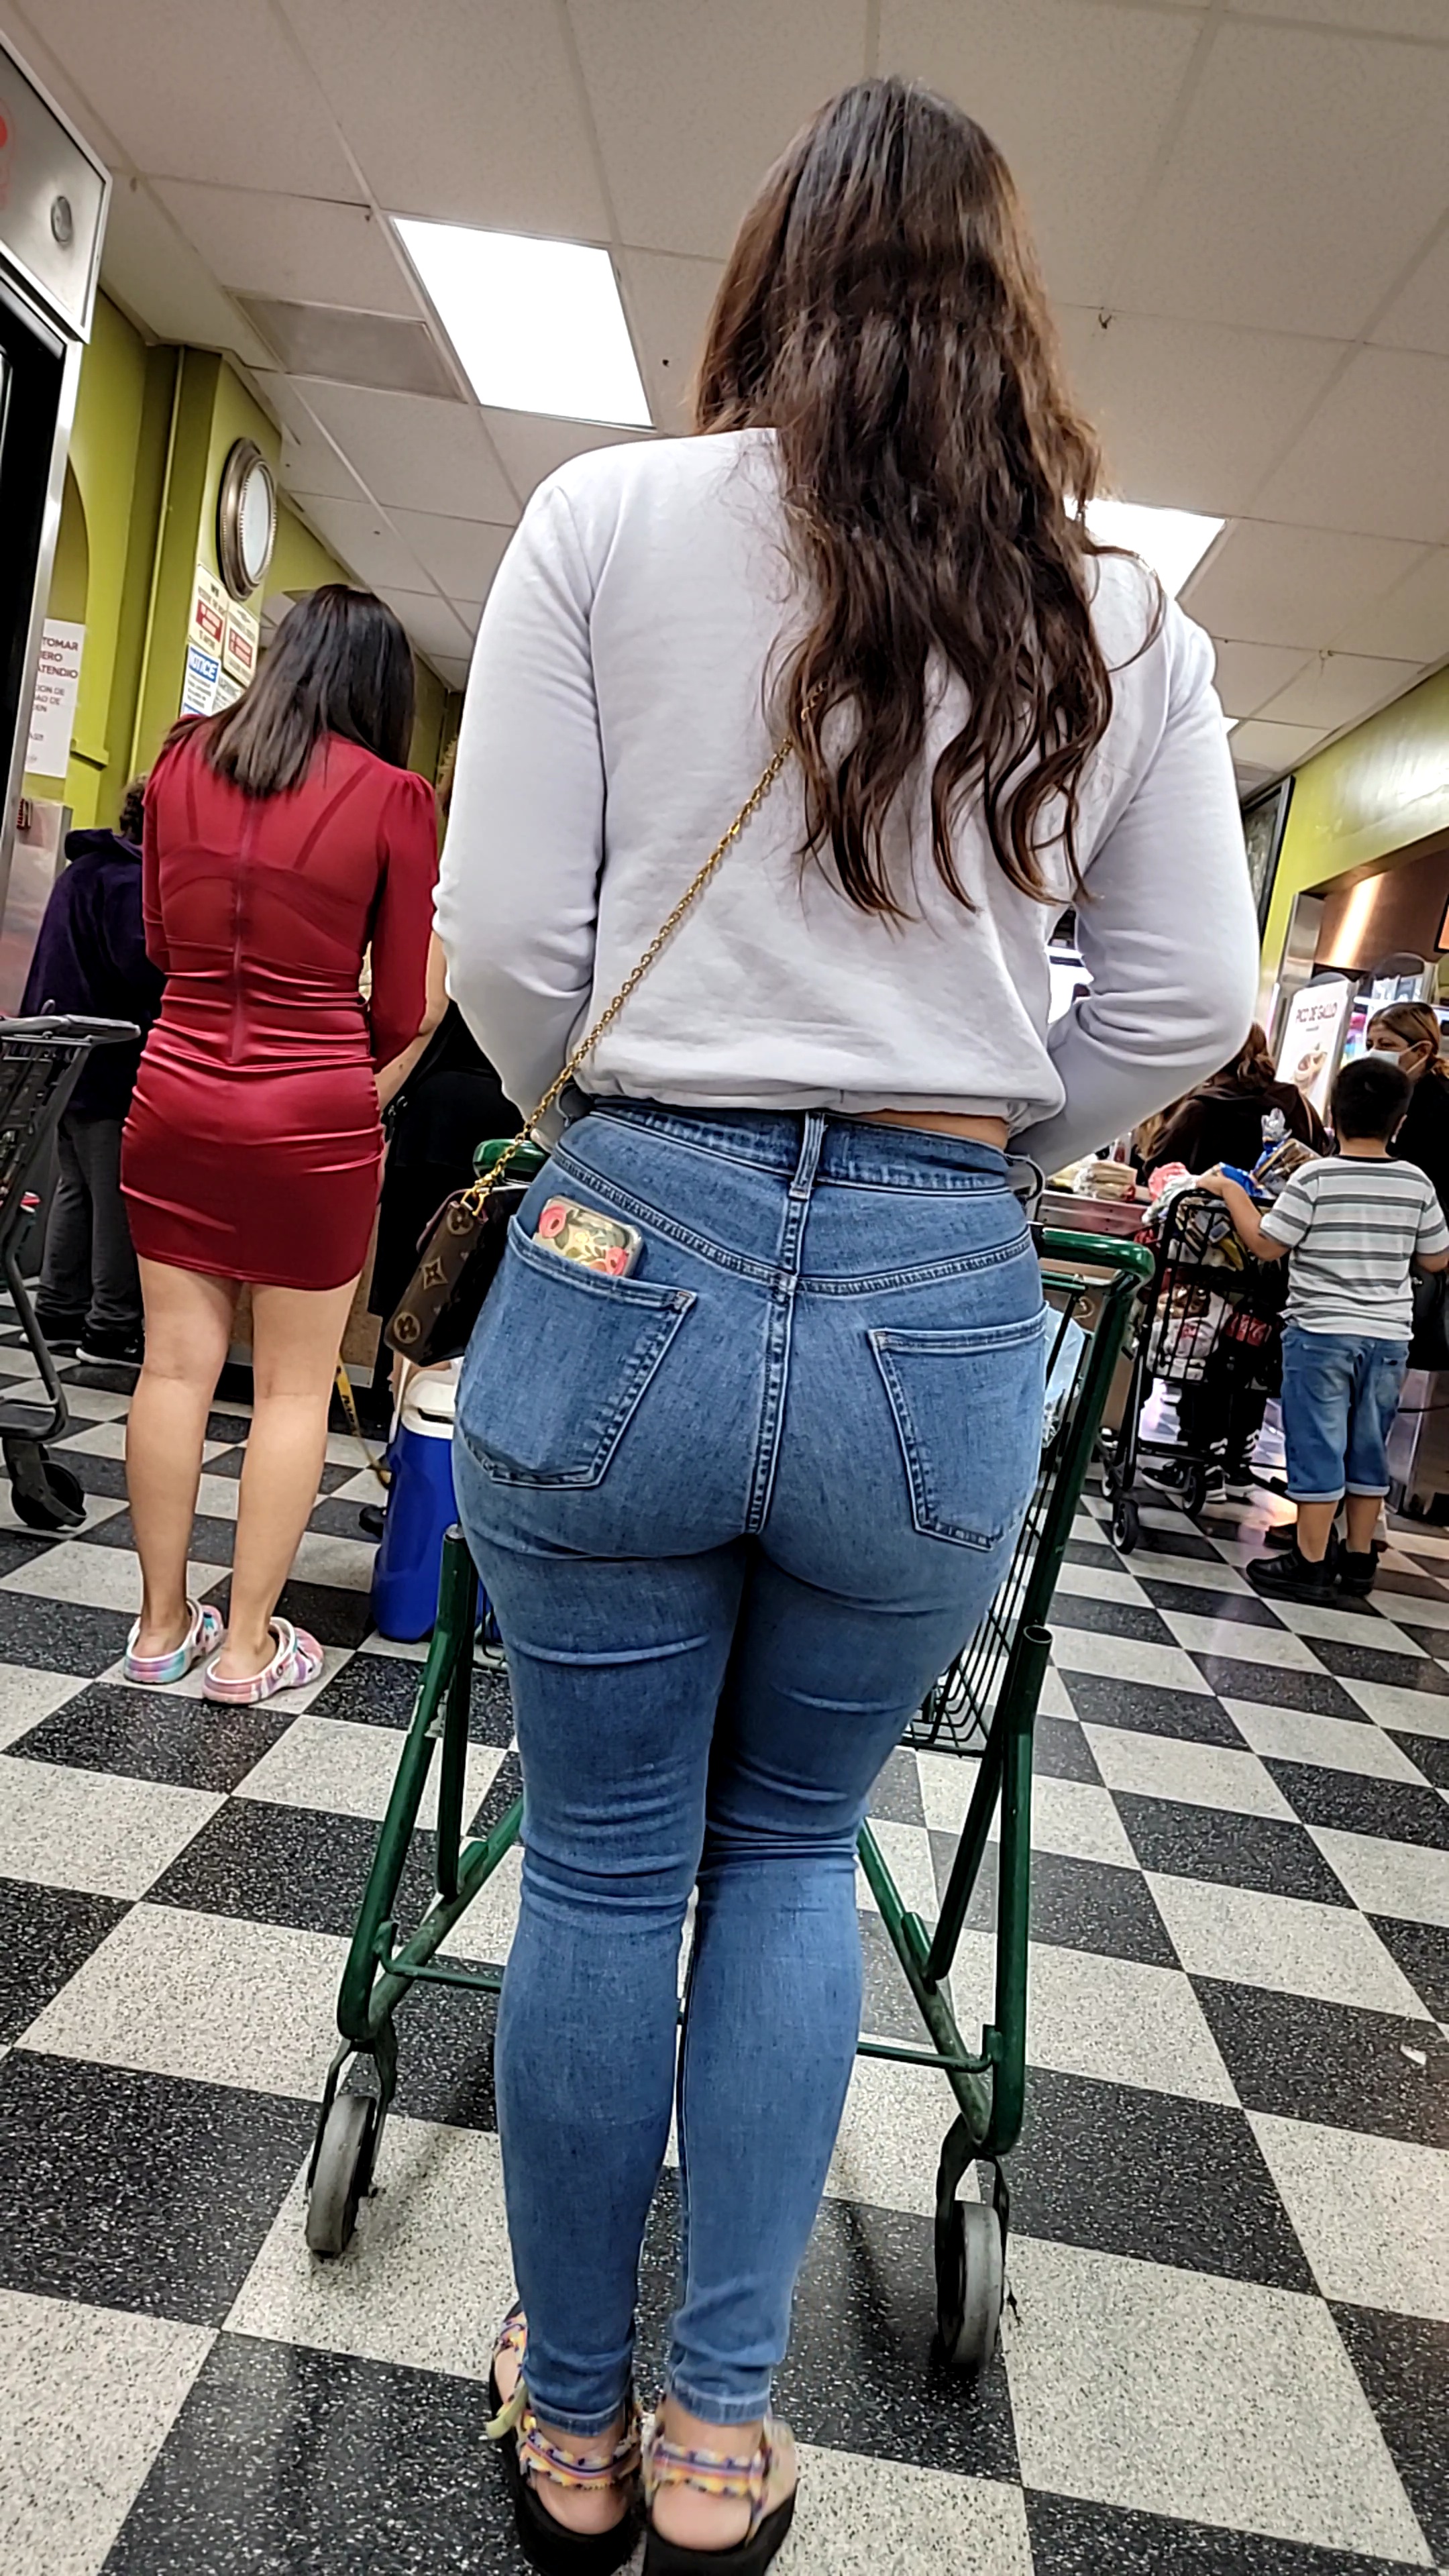 Latina in tight jeans (good set) - Tight Jeans - Forum